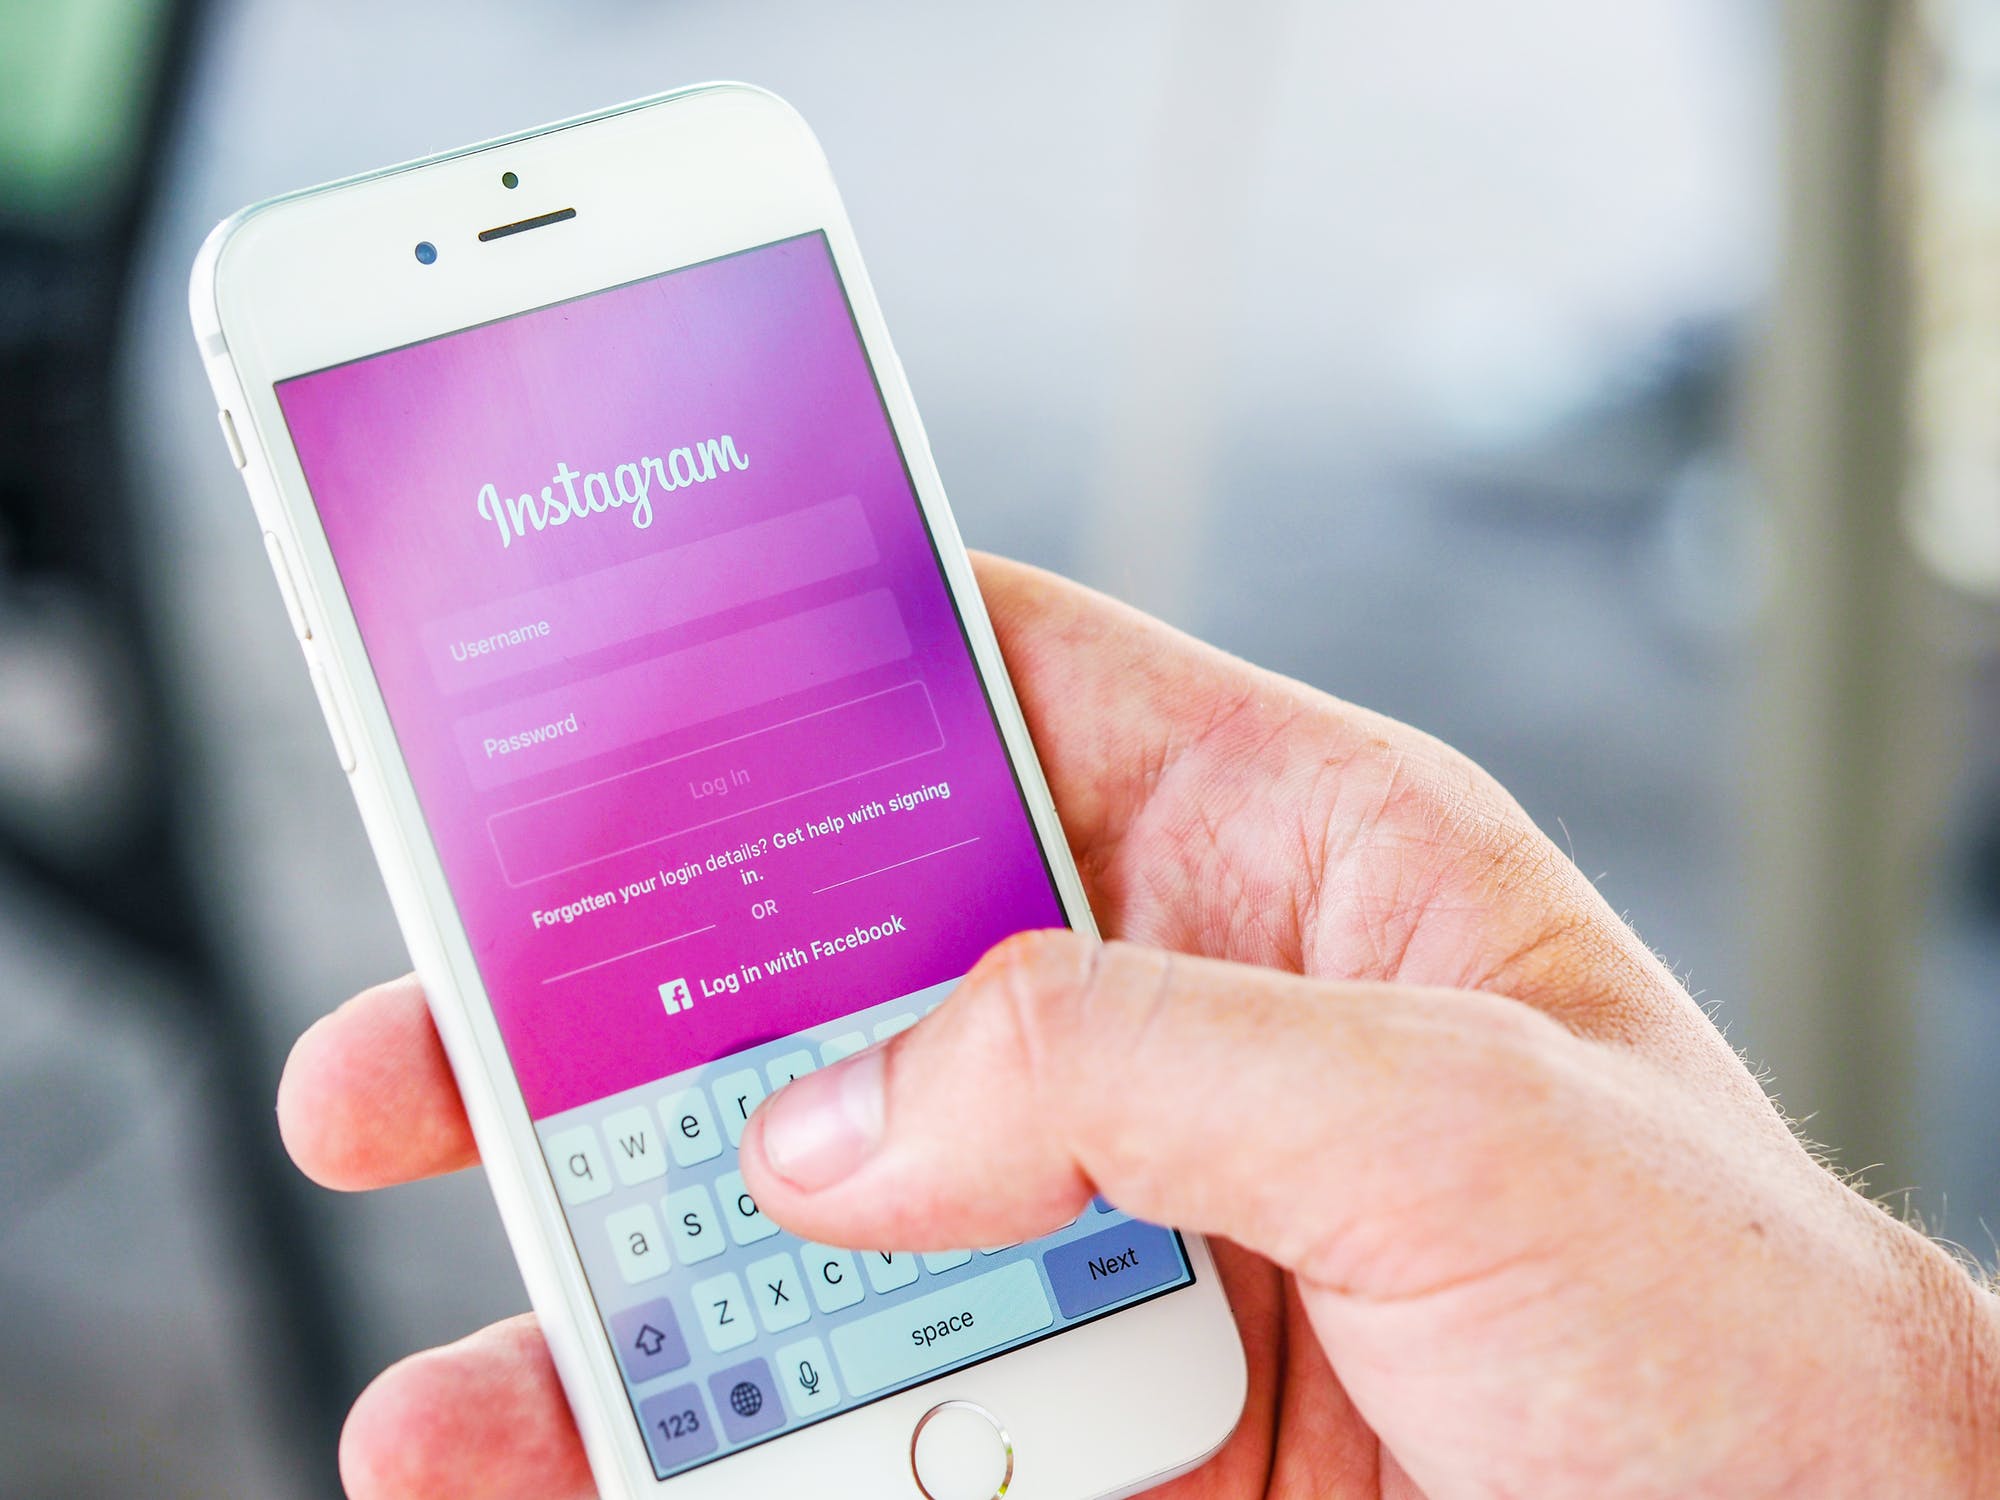 How Do I Recover Instagram Accounts On IPhone